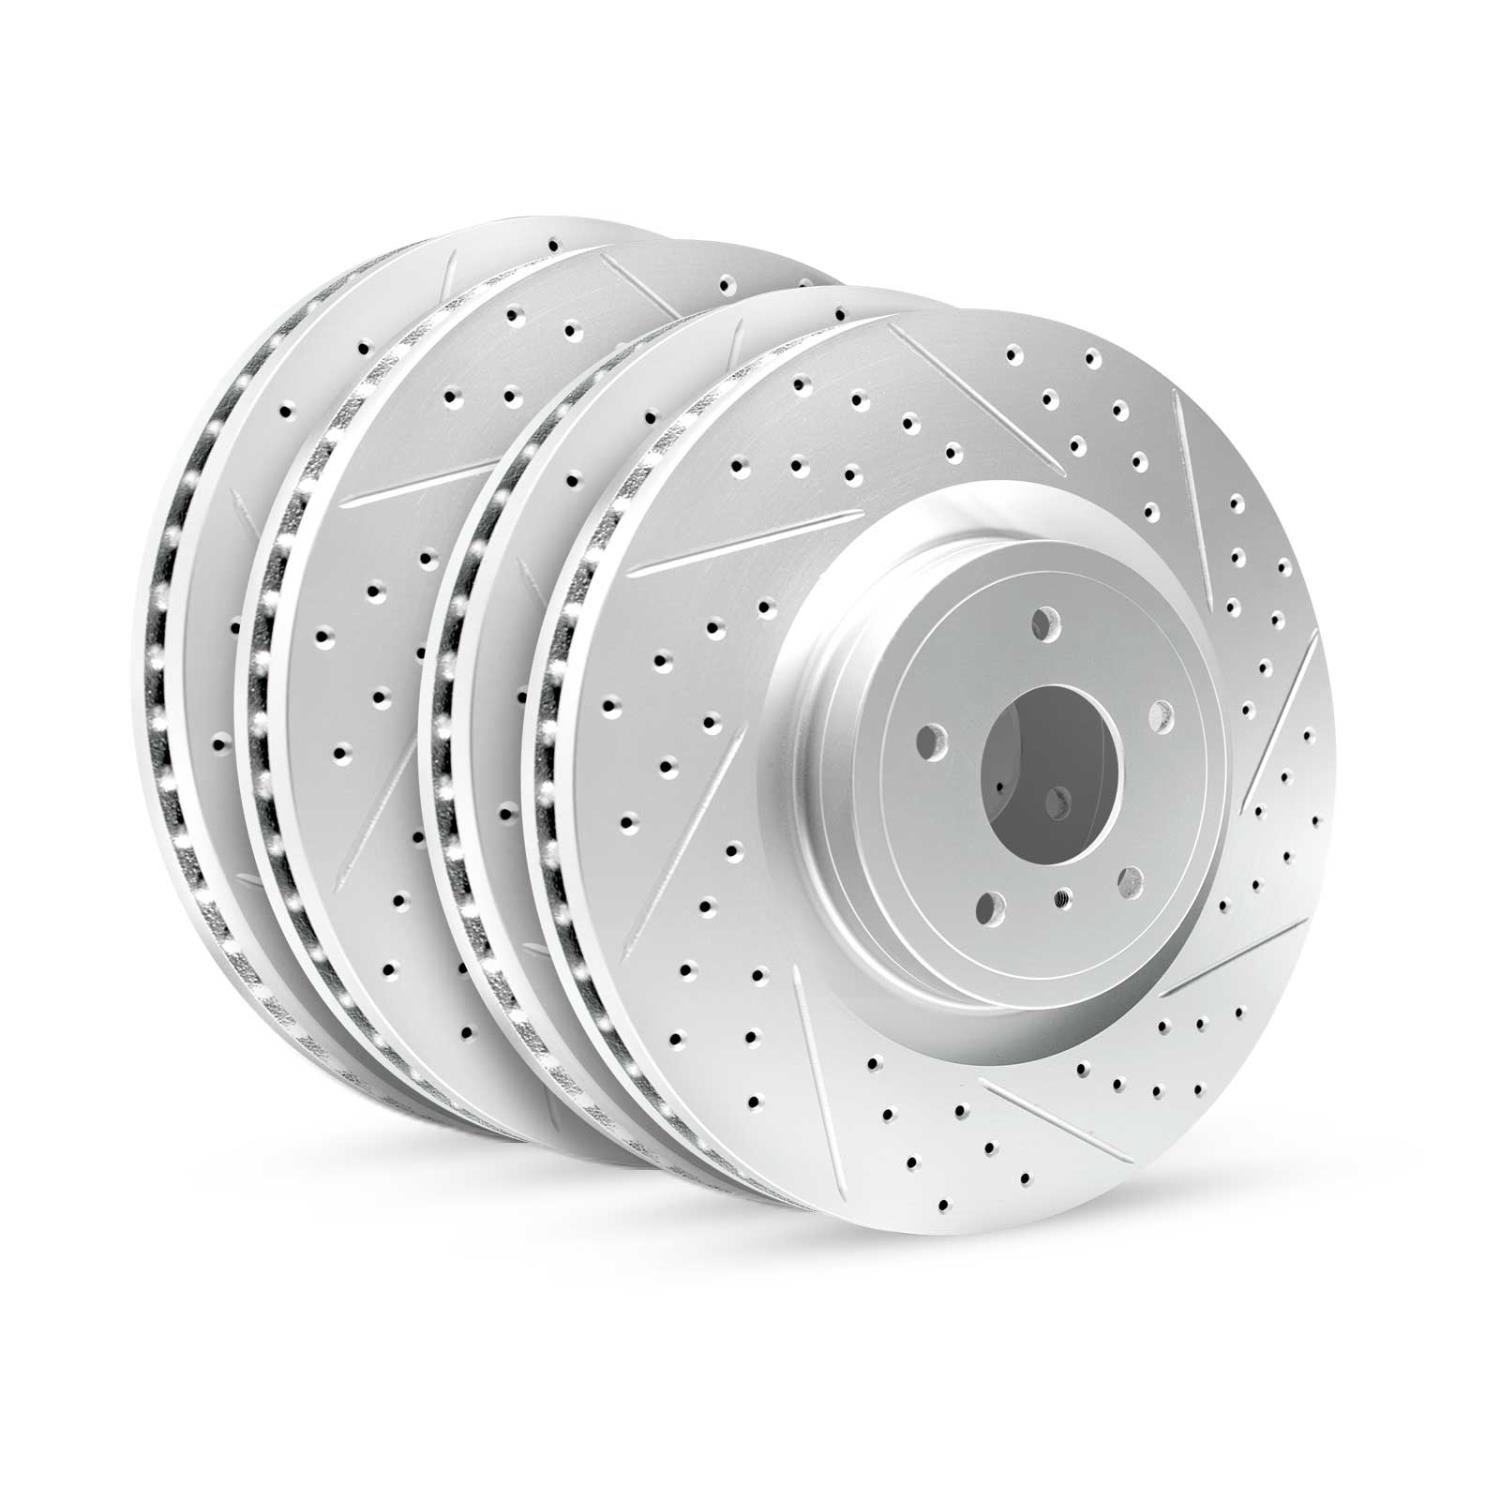 GEO-Carbon Drilled/Slotted Rotors, 2011-2016 BMW, Position: Front/Rear